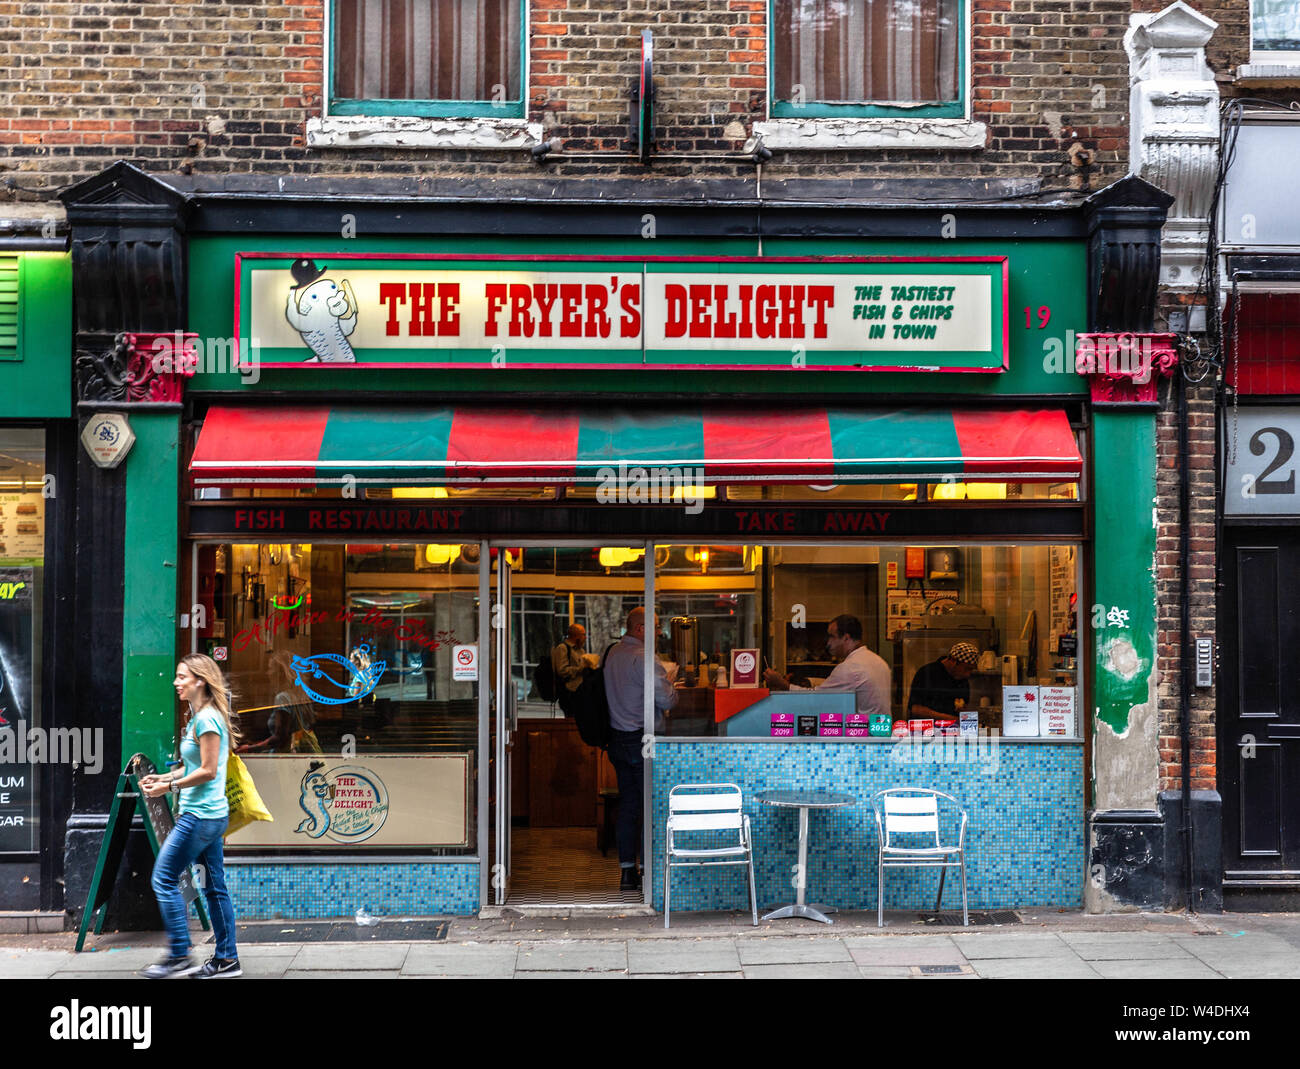 The Fryer's Delight Fish and chips shop, 19 Theobalds Rd, Holborn, Londra, Inghilterra, Regno Unito. Foto Stock